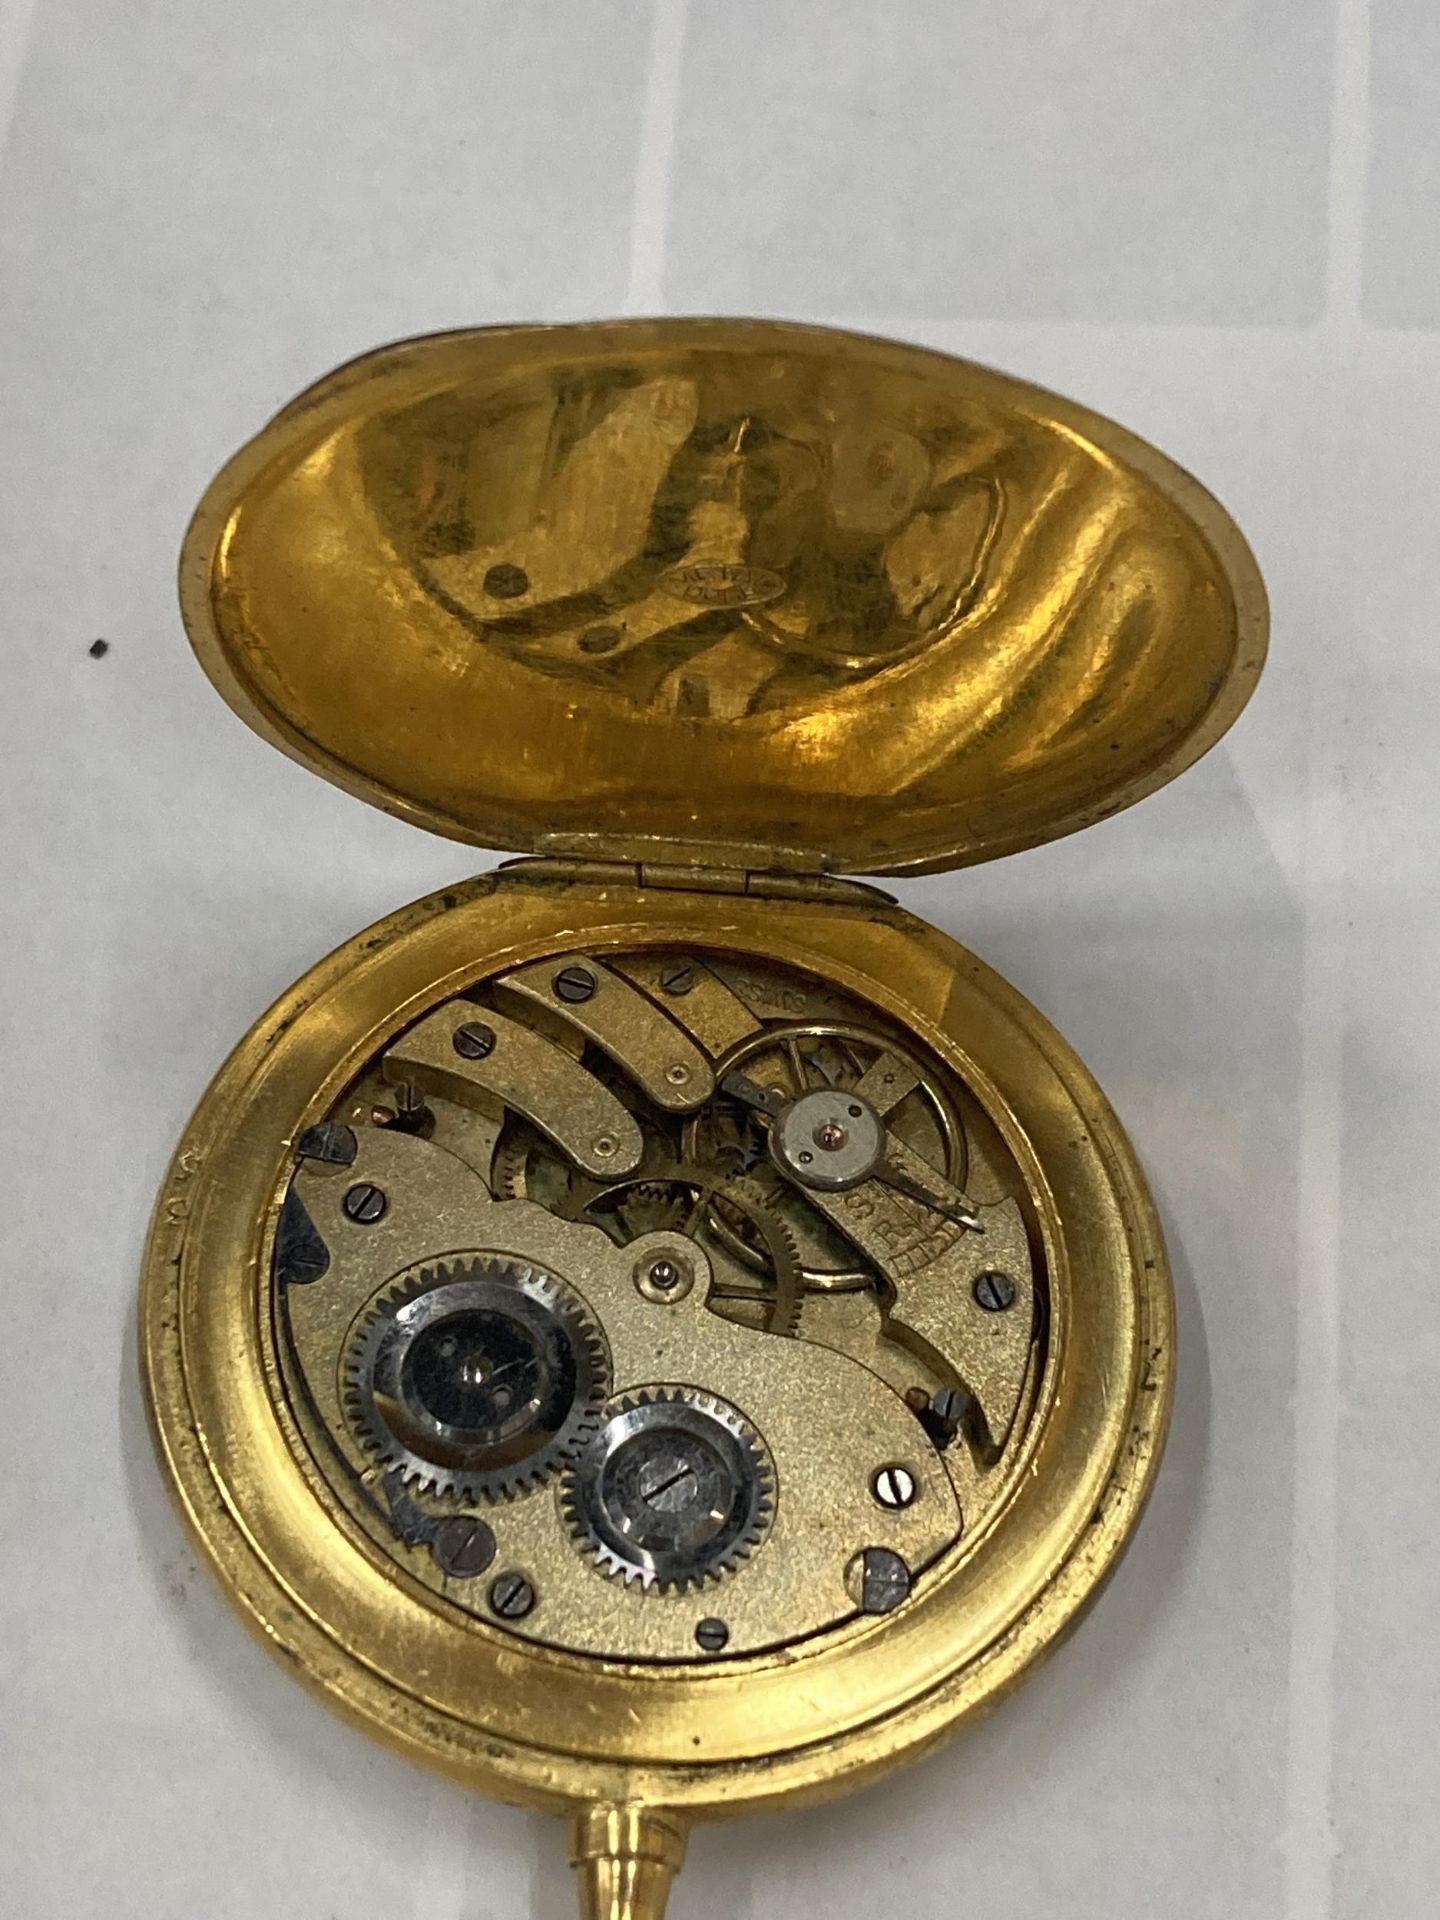 A VINTAGE LORD OPEN FACED POCKET WATCH - Image 3 of 3